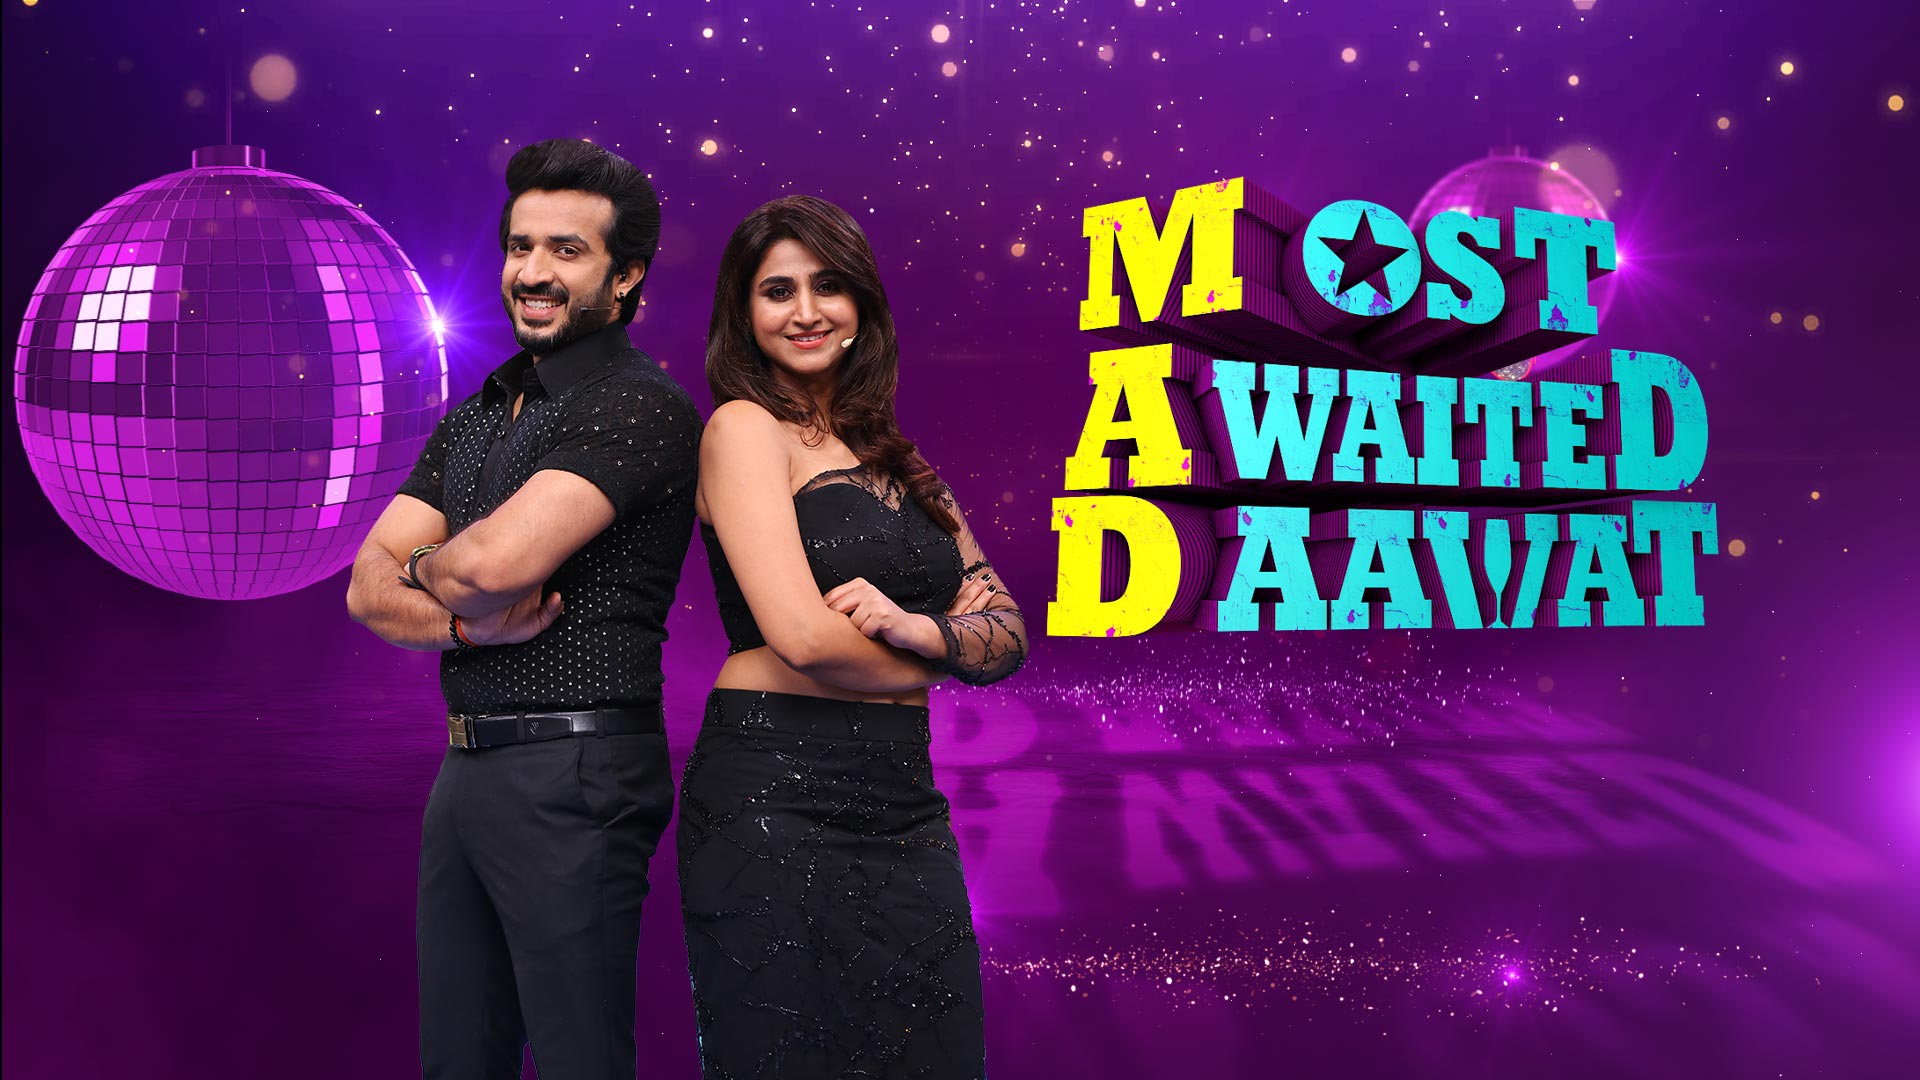 MAD - Most Awaited Daawat